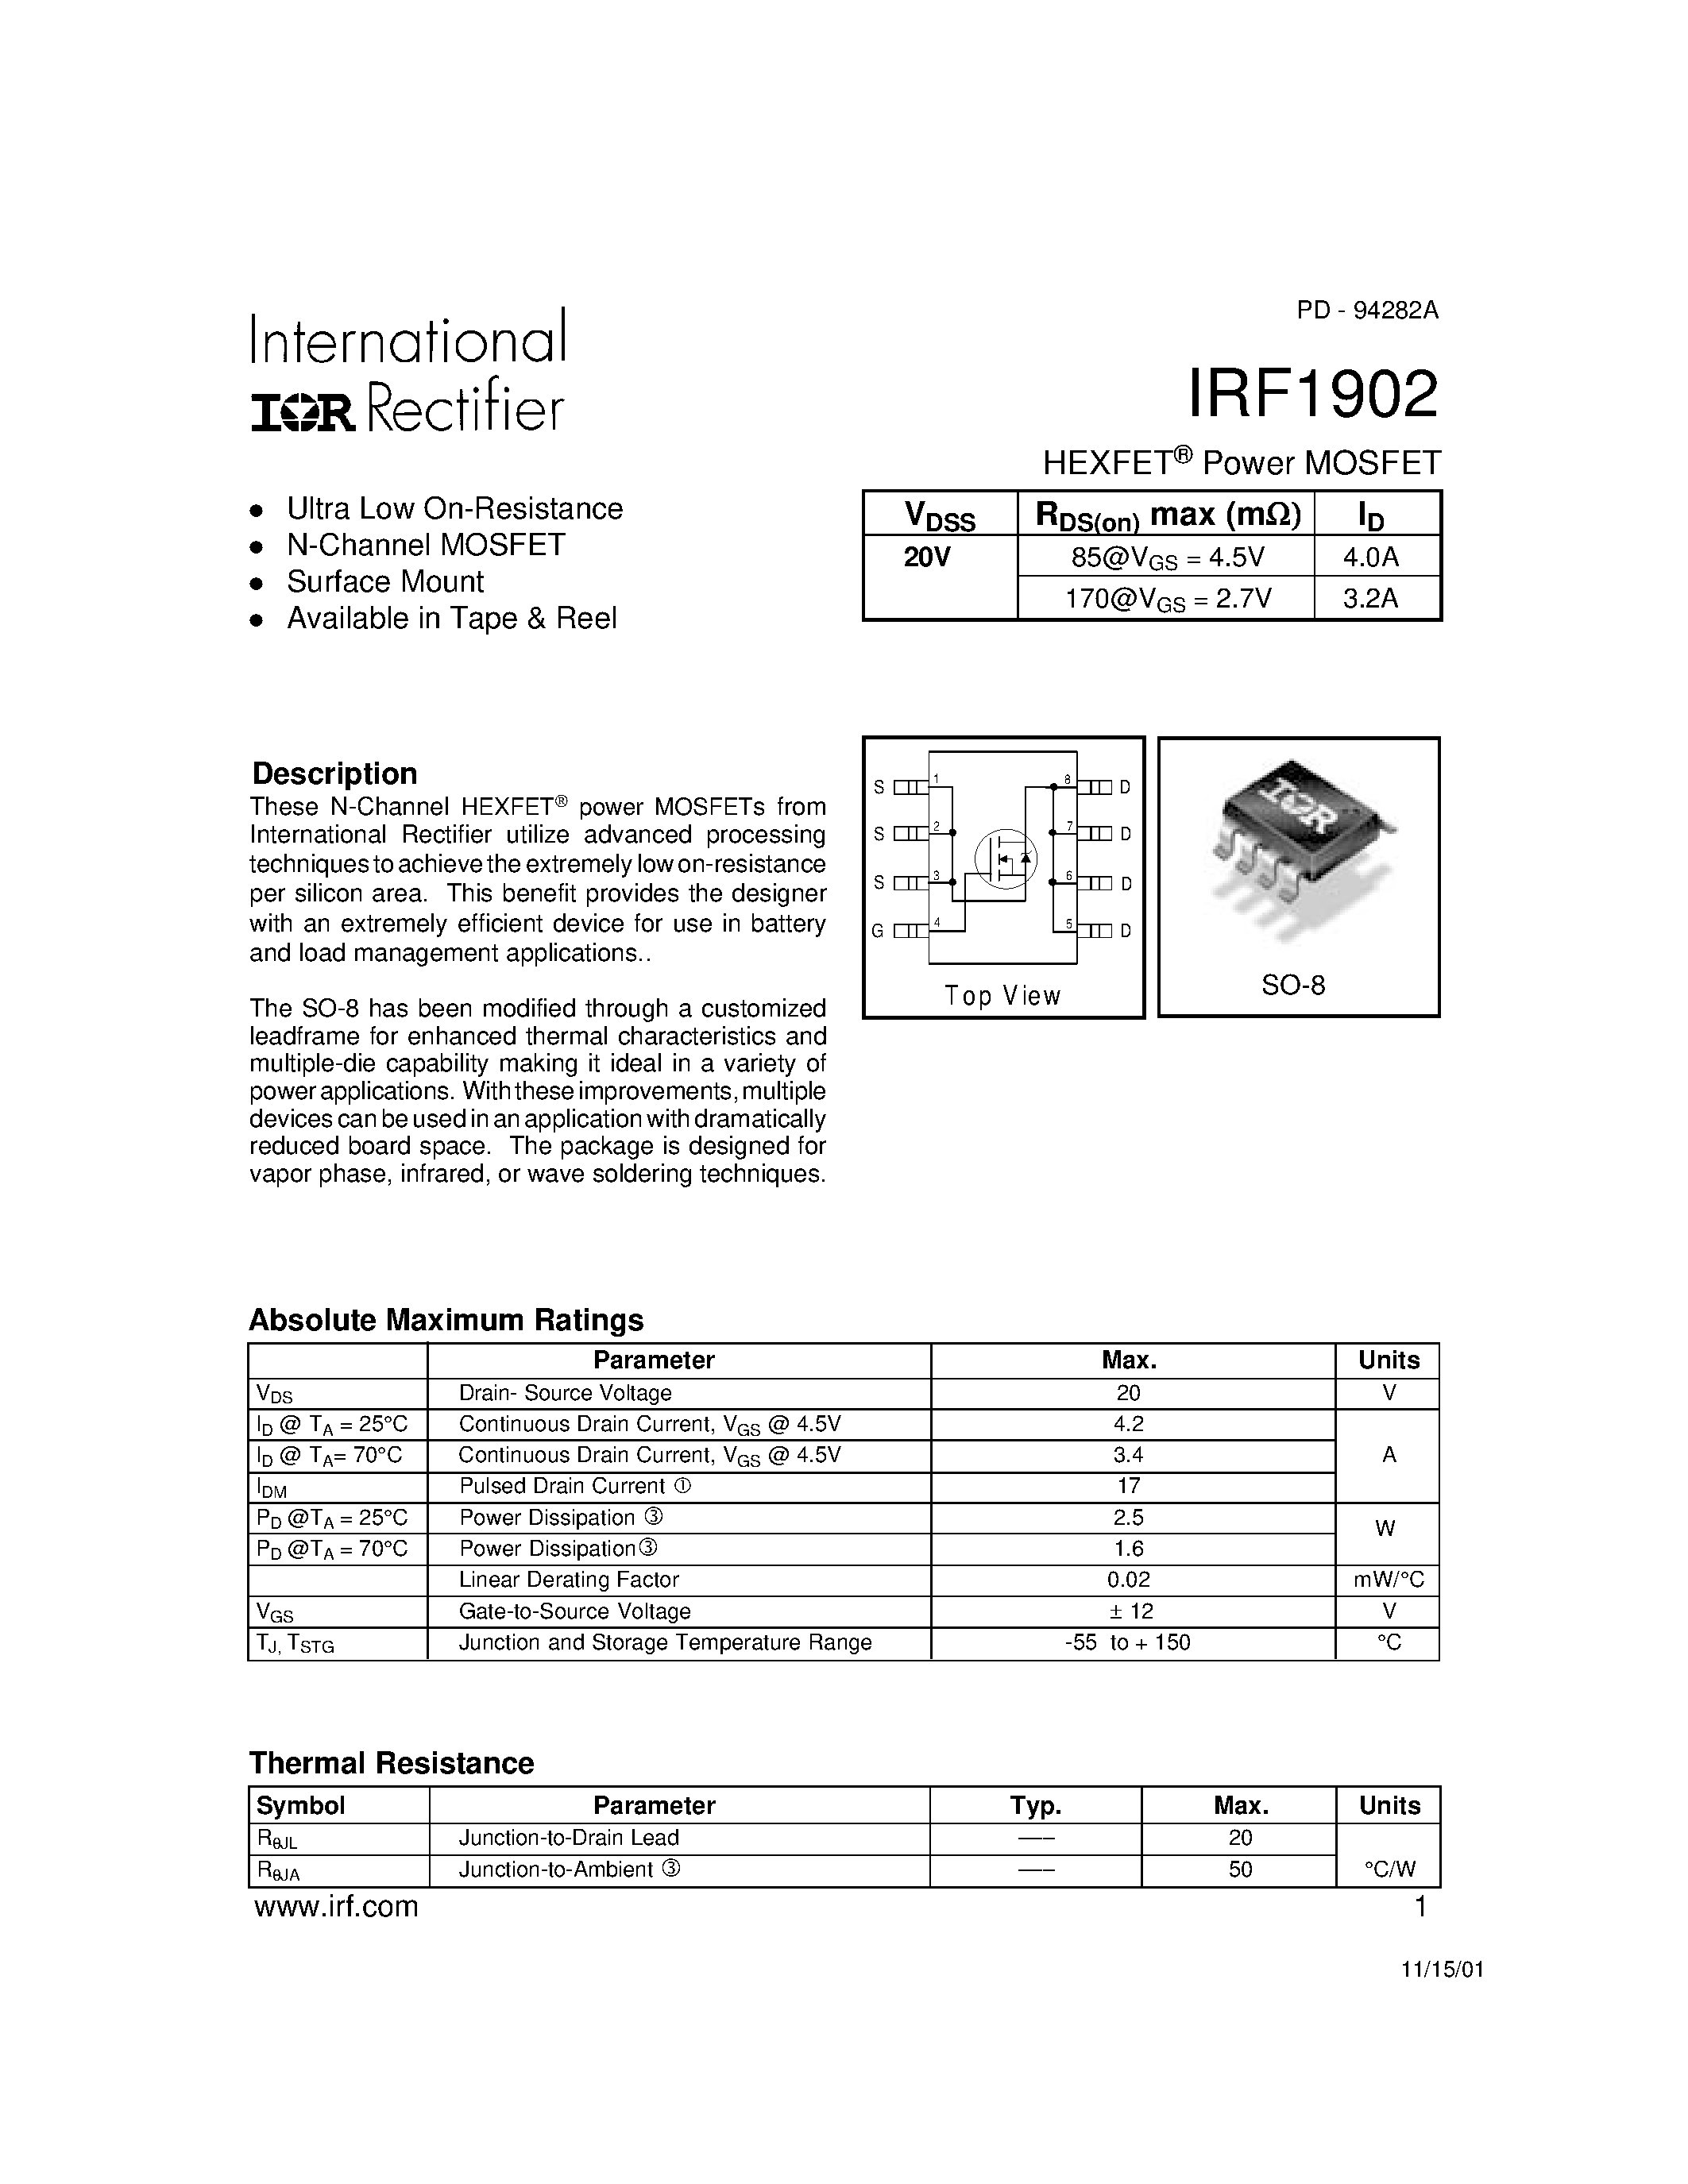 Datasheet IRF1902 - Power MOSFET(Vdss=20V) page 1